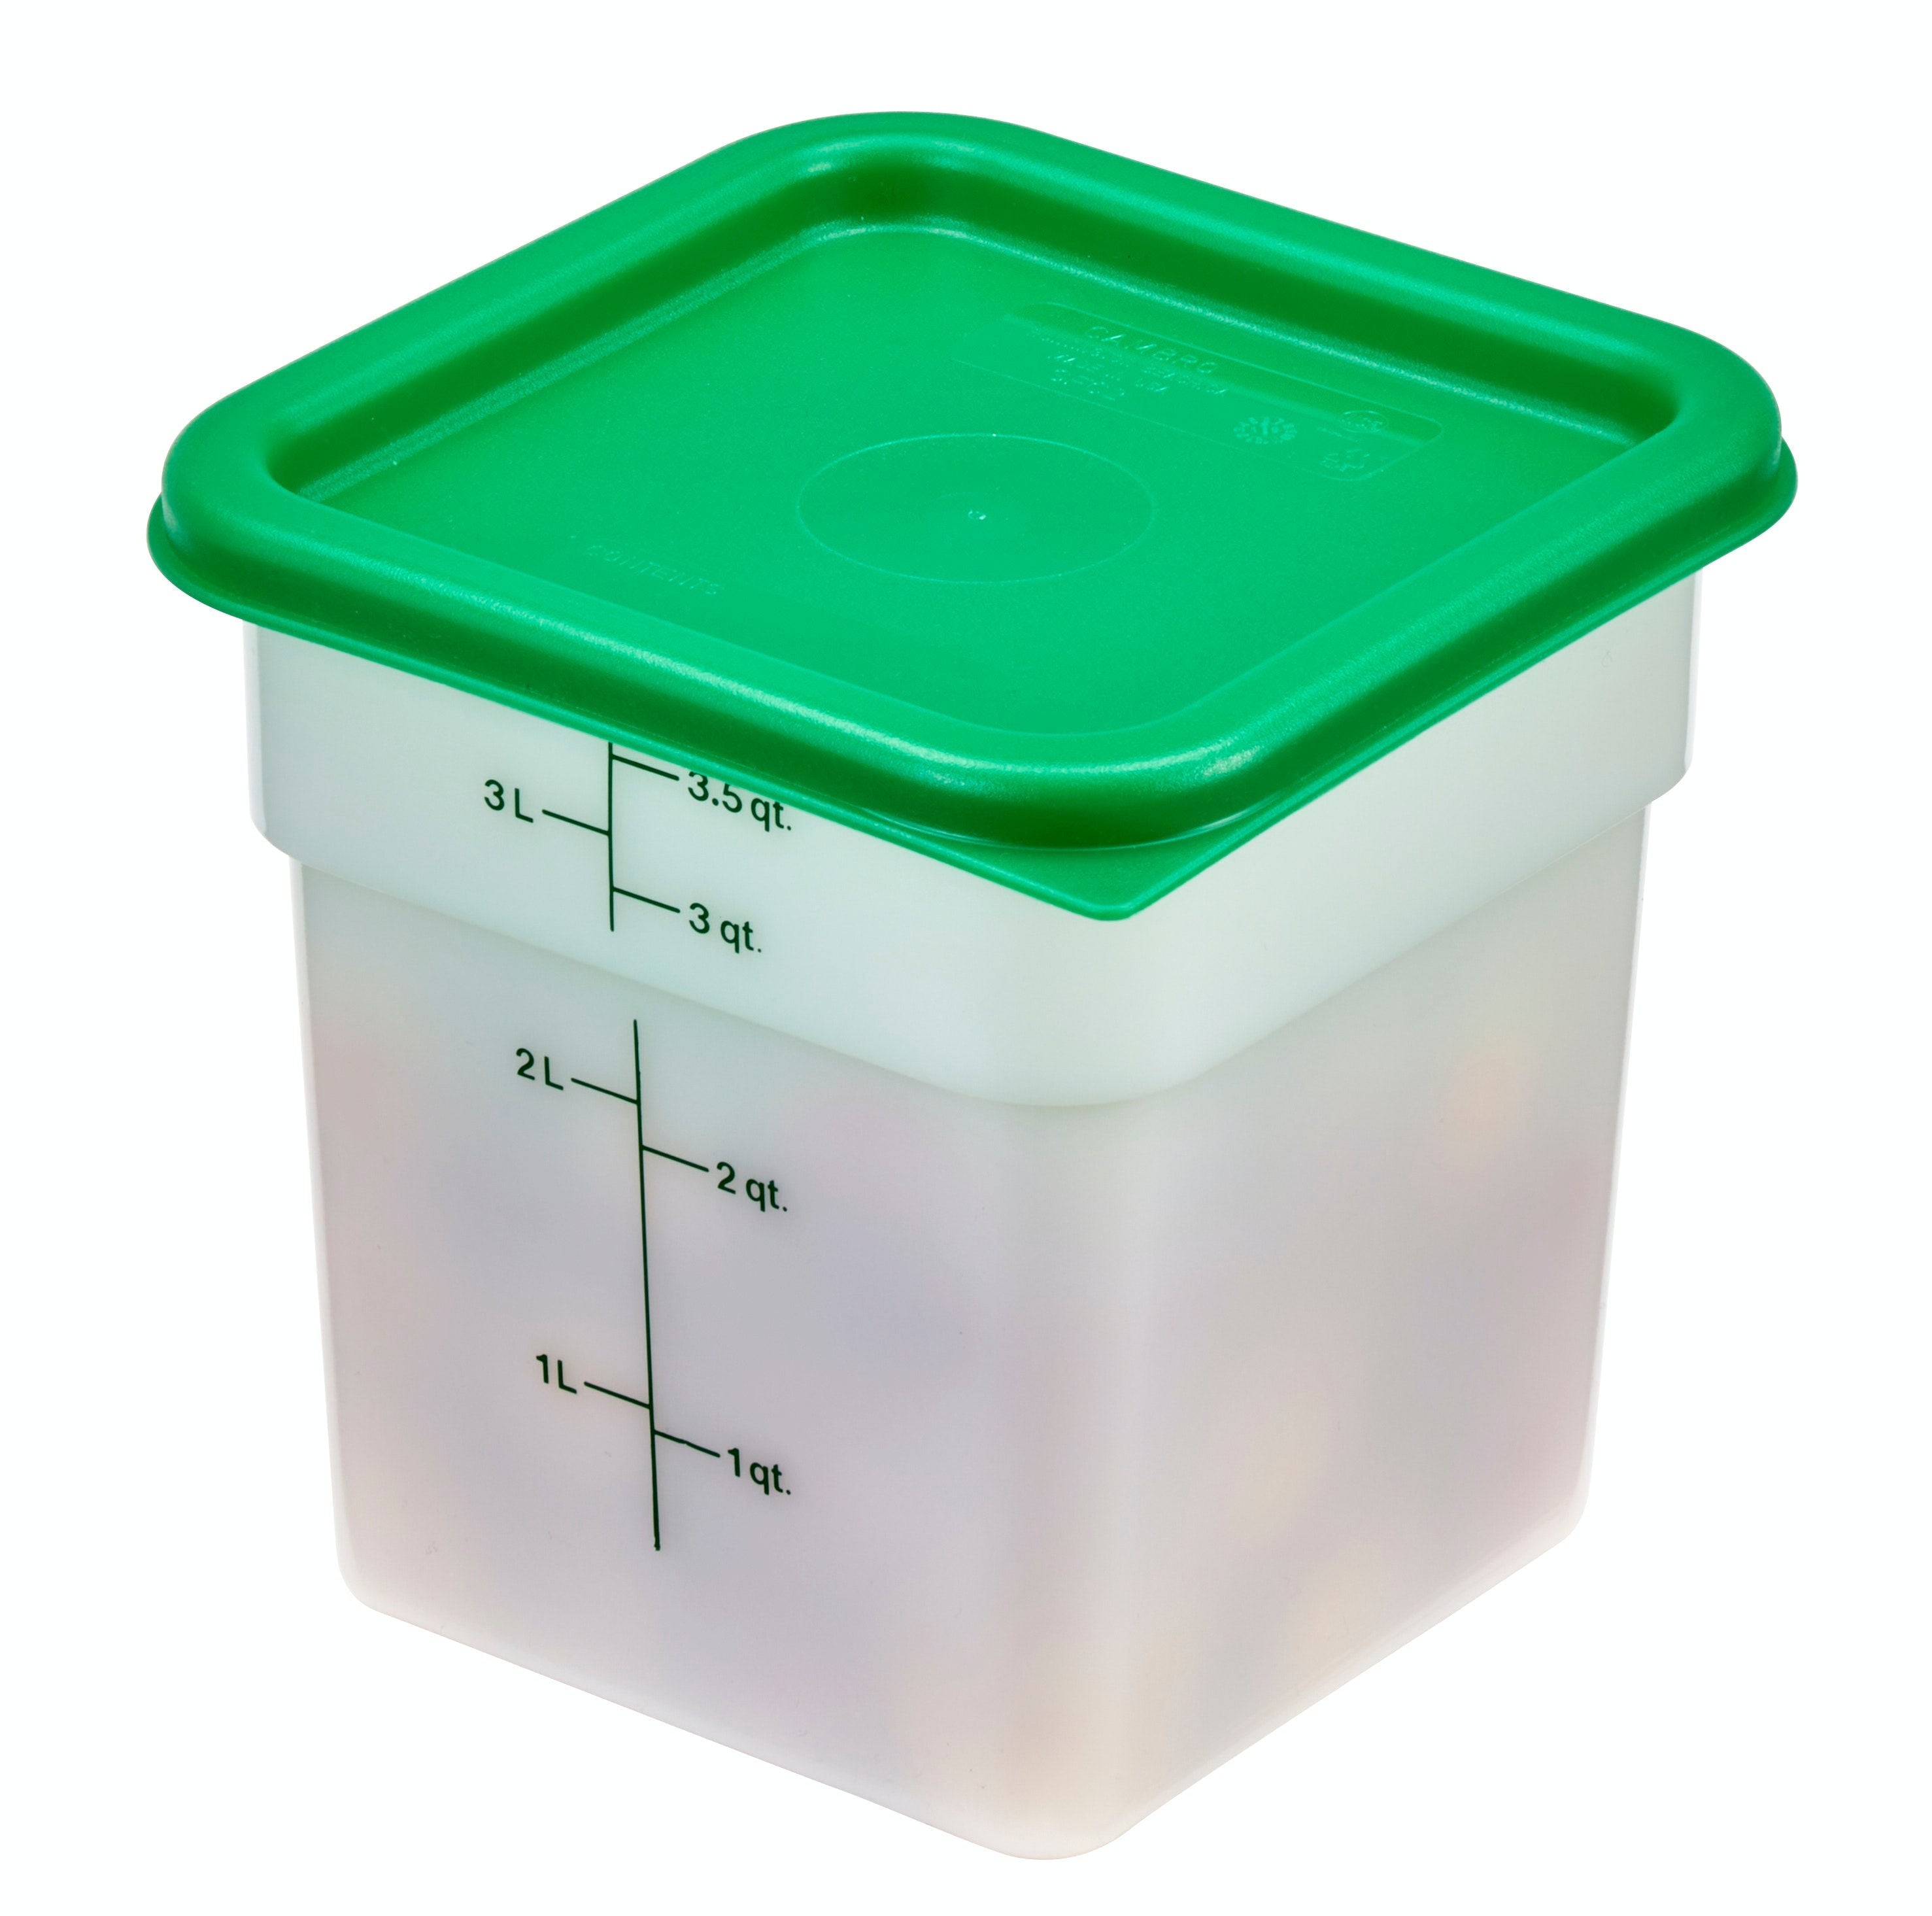 Cambro CamSquares® 4 Qt. Translucent Square Polypropylene Food Storage  Container and Green Lid - 3/Pack